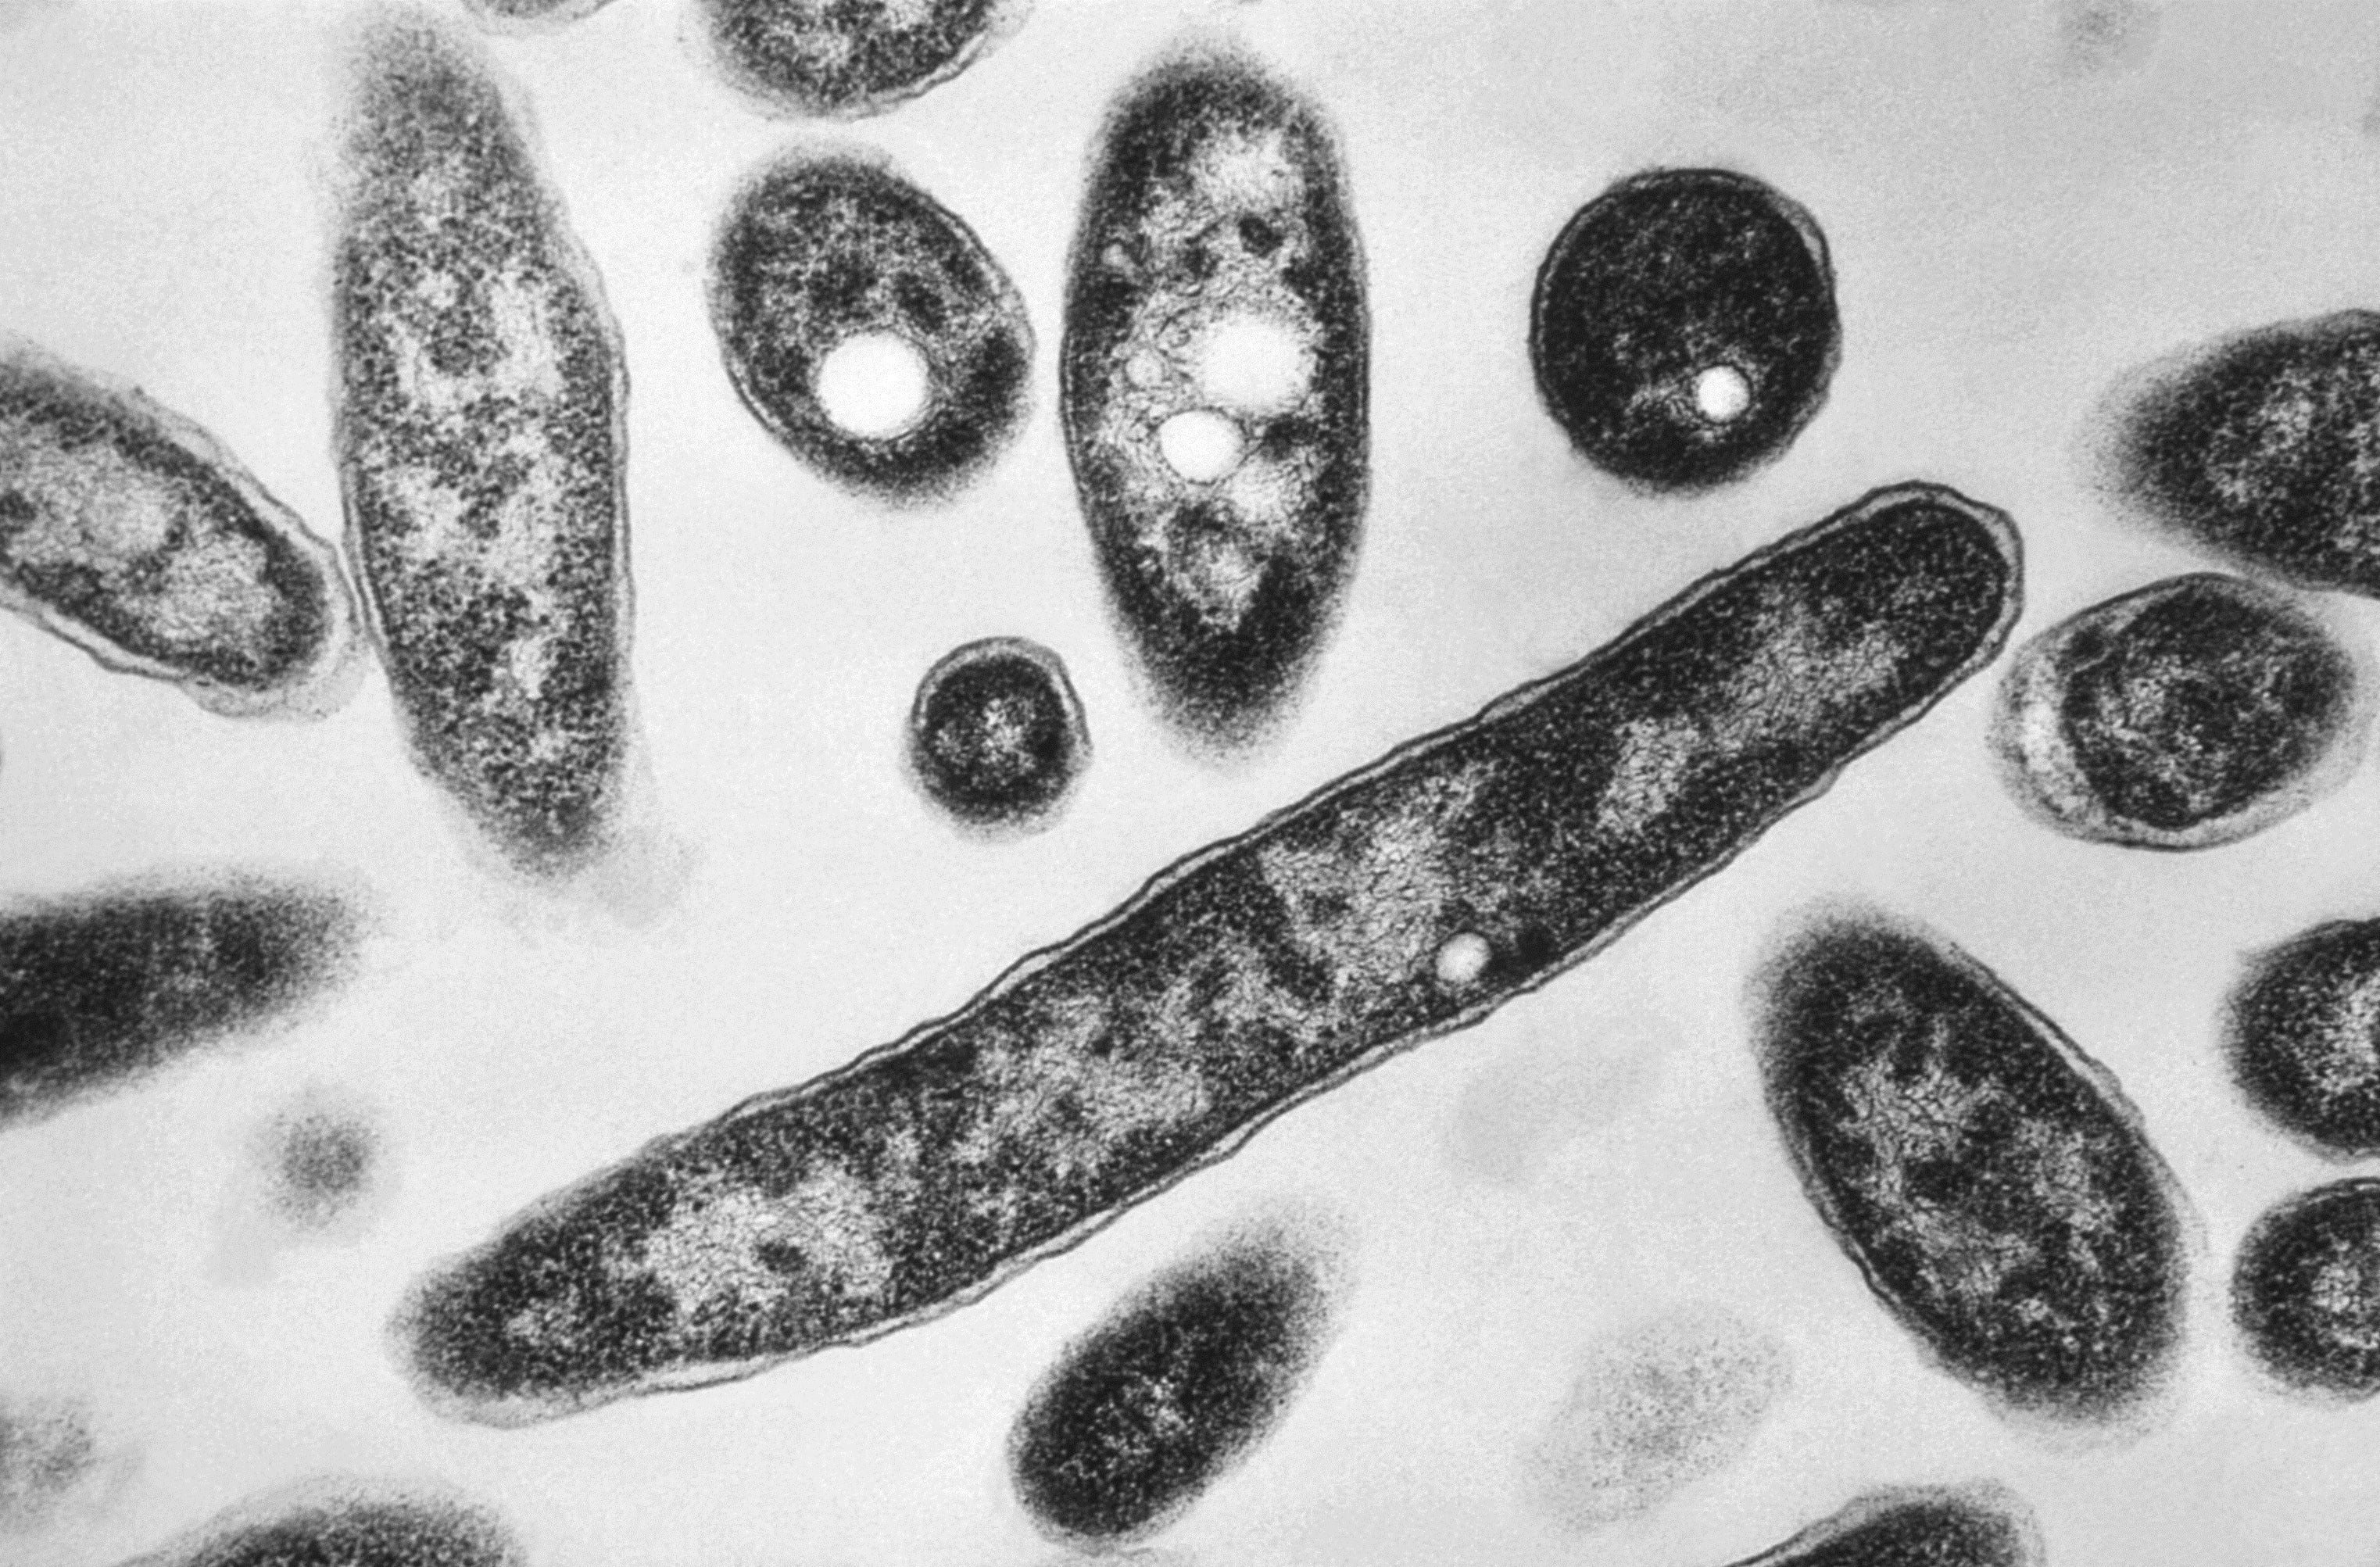 Microscopic bacteria could one day help to solve murders